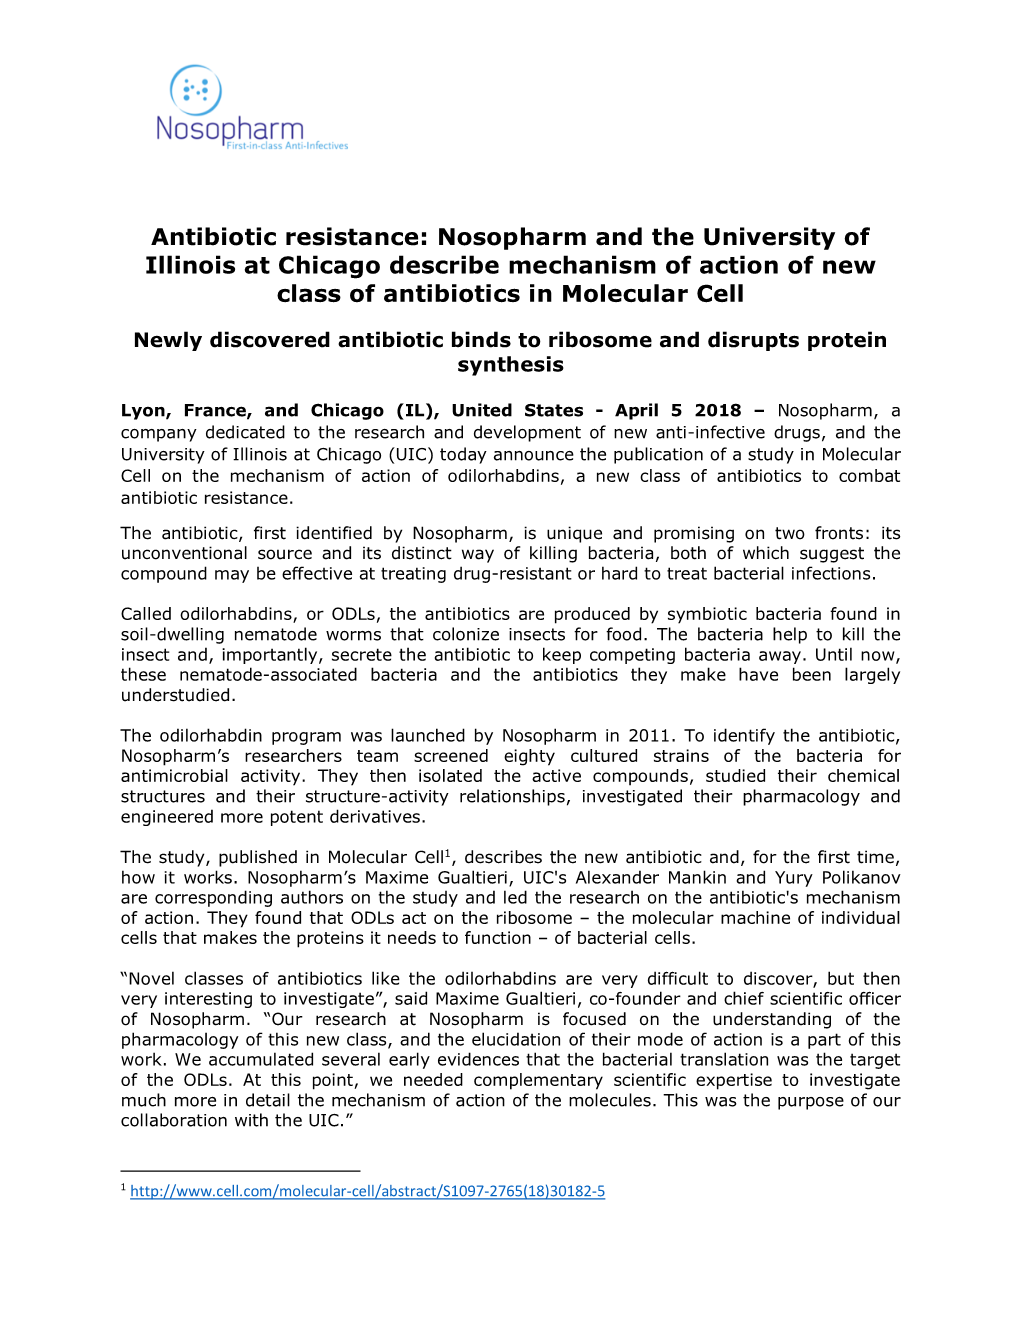 Antibiotic Resistance: Nosopharm and the University of Illinois at Chicago Describe Mechanism of Action of New Class of Antibiotics in Molecular Cell